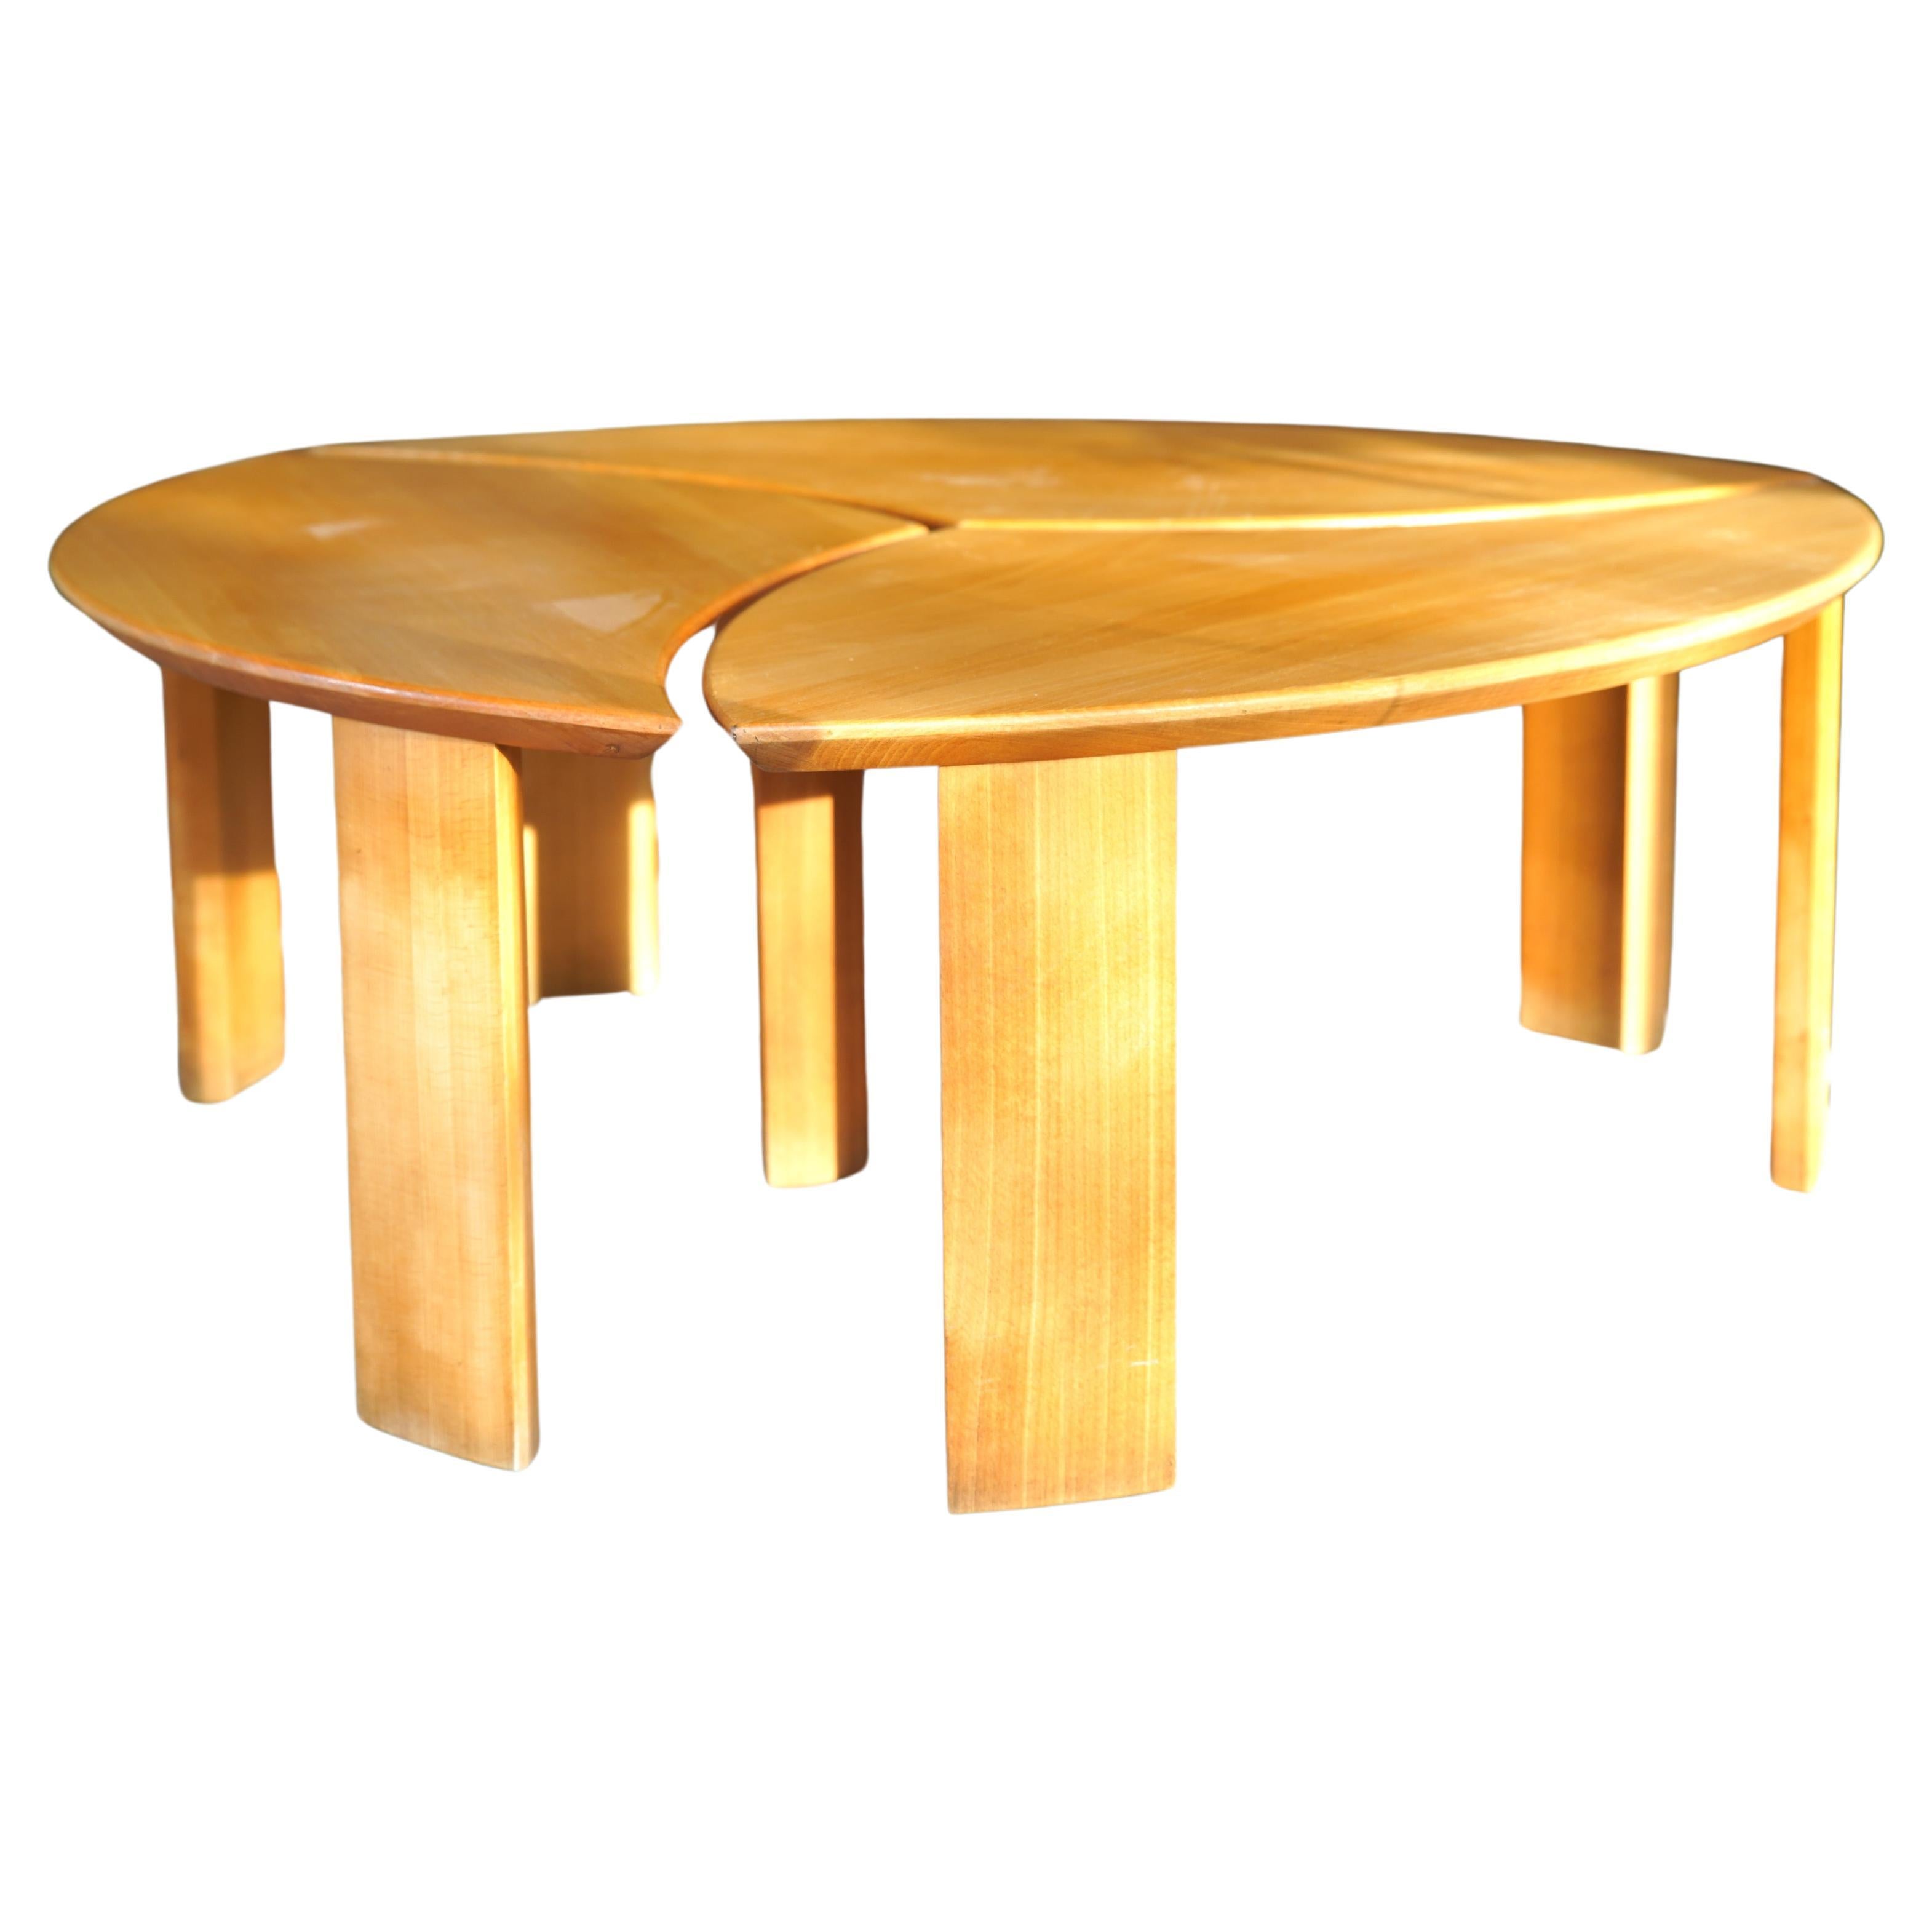 Pierre Chapo 'Petal' Coffee Table in Elm Wood for Seltz, France circa 1978